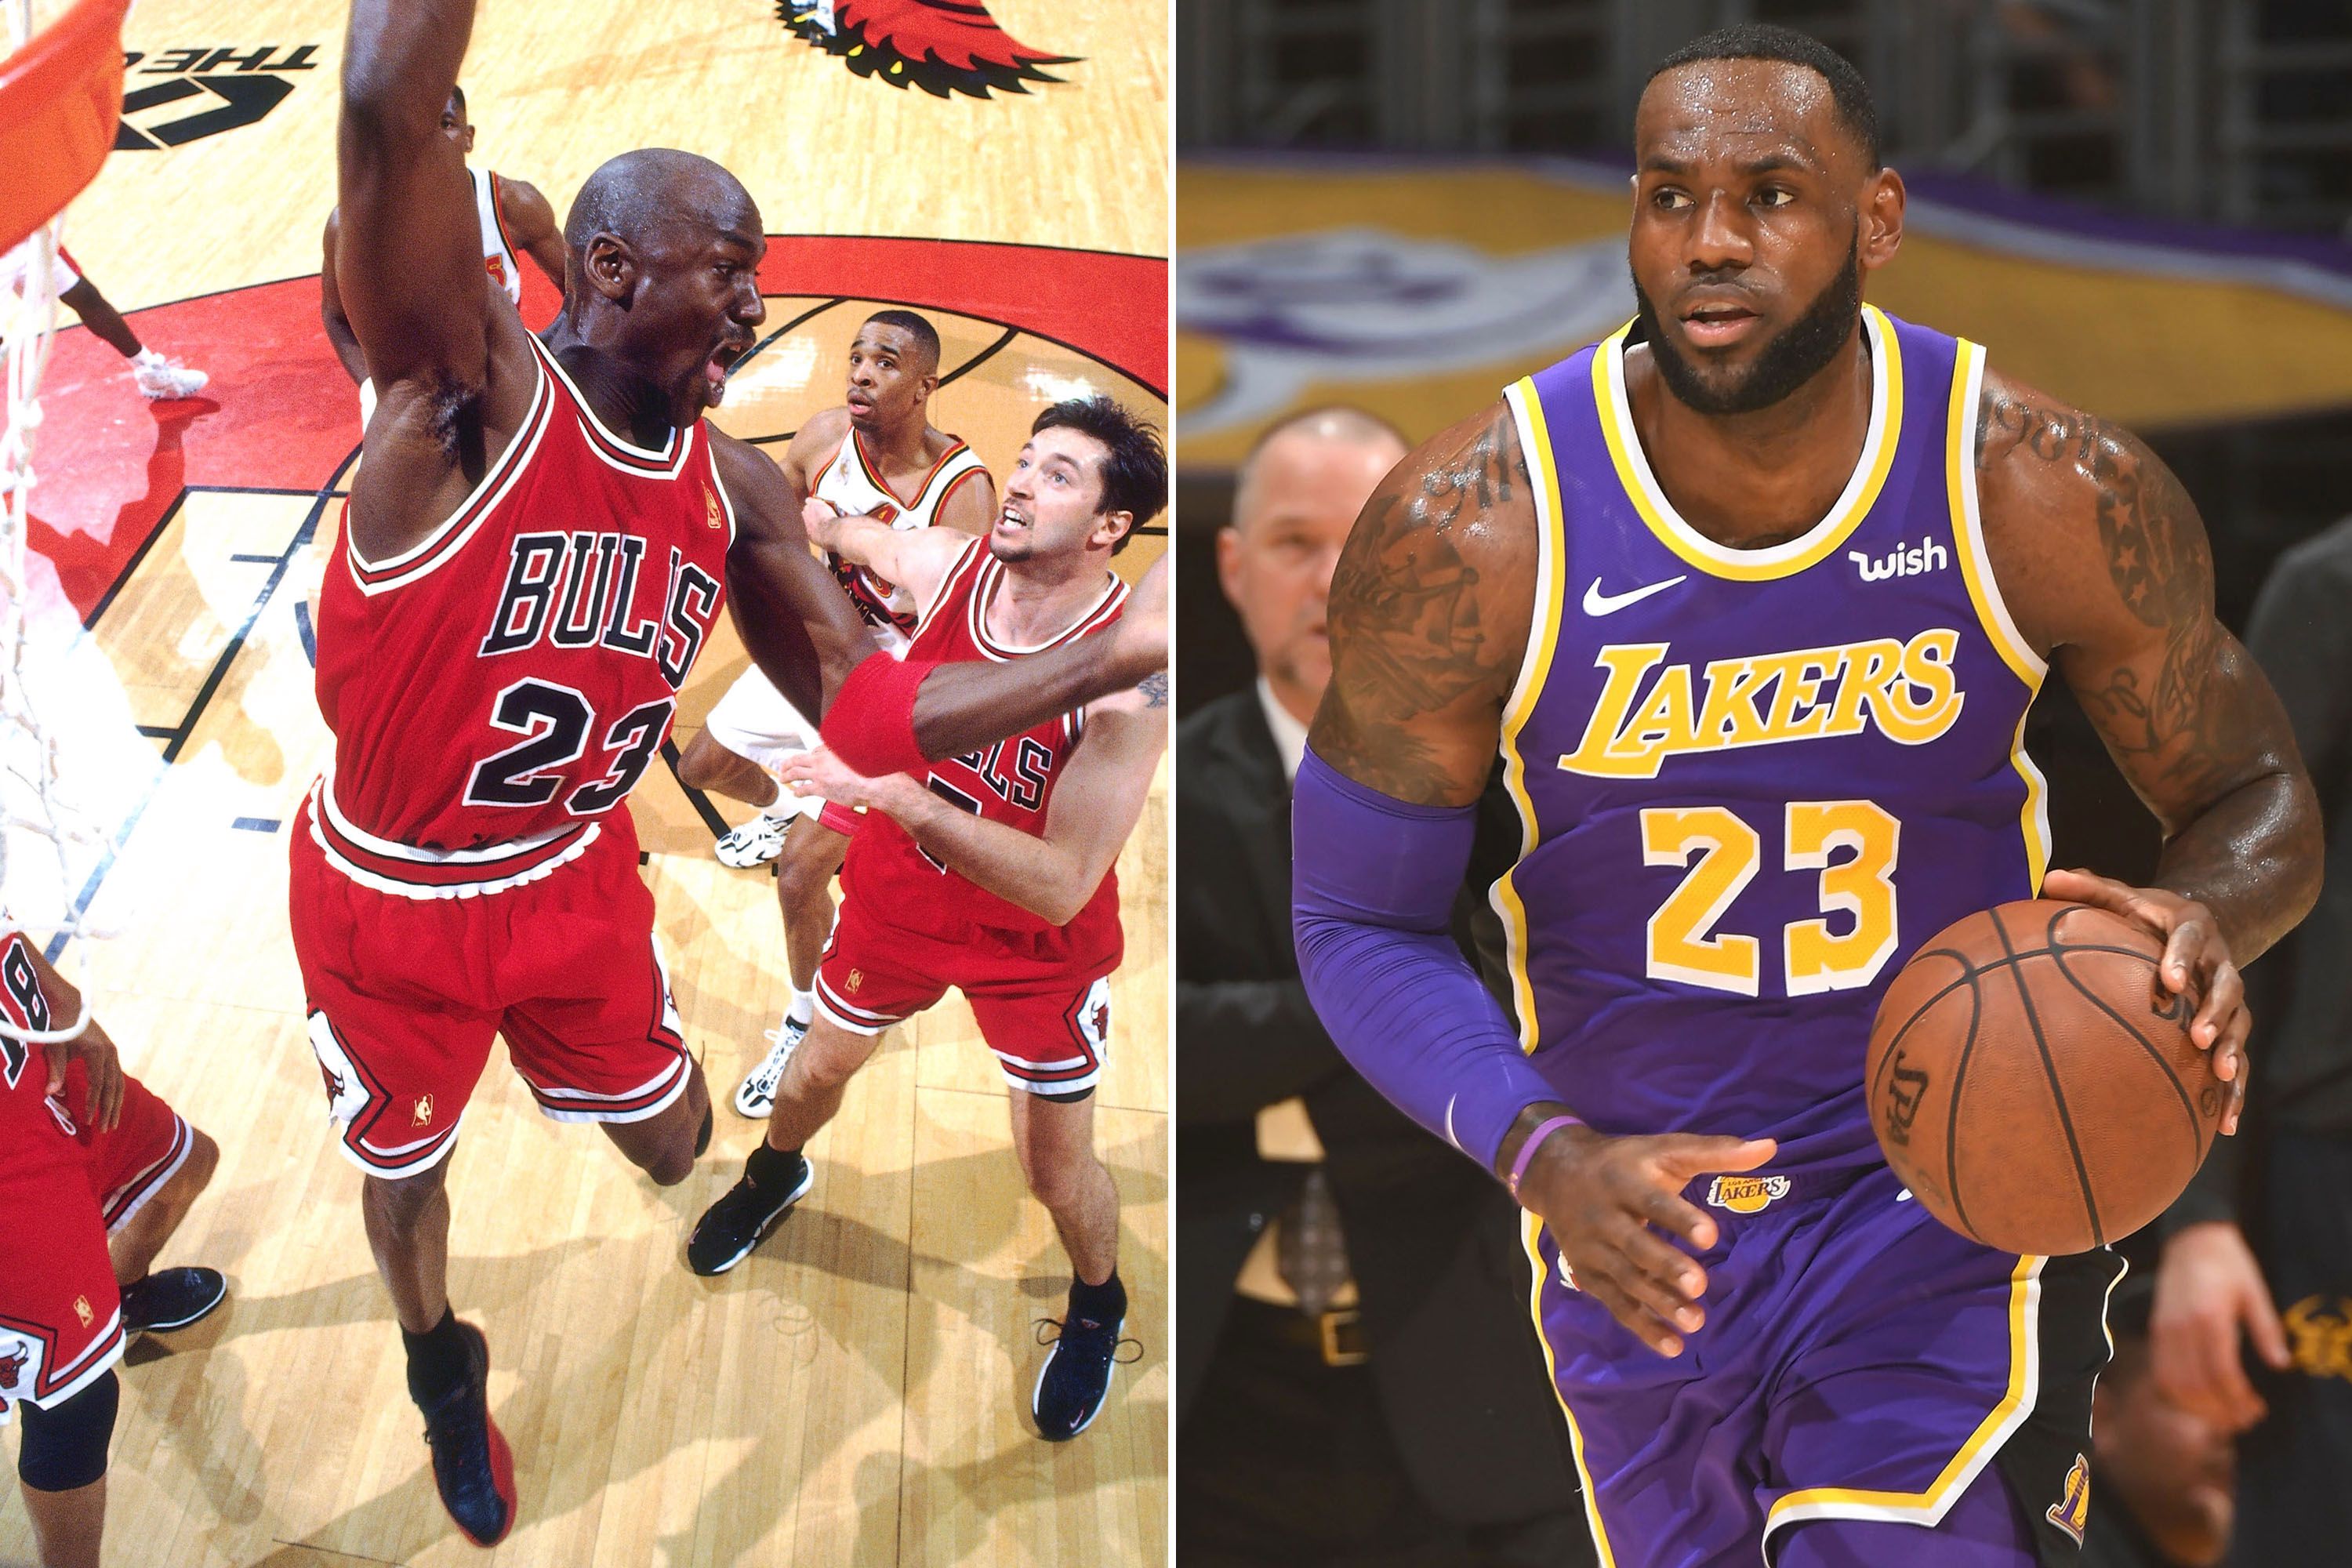 Lebron James officially passed legend Michael Jordan on the NBA’s all-time scoring list